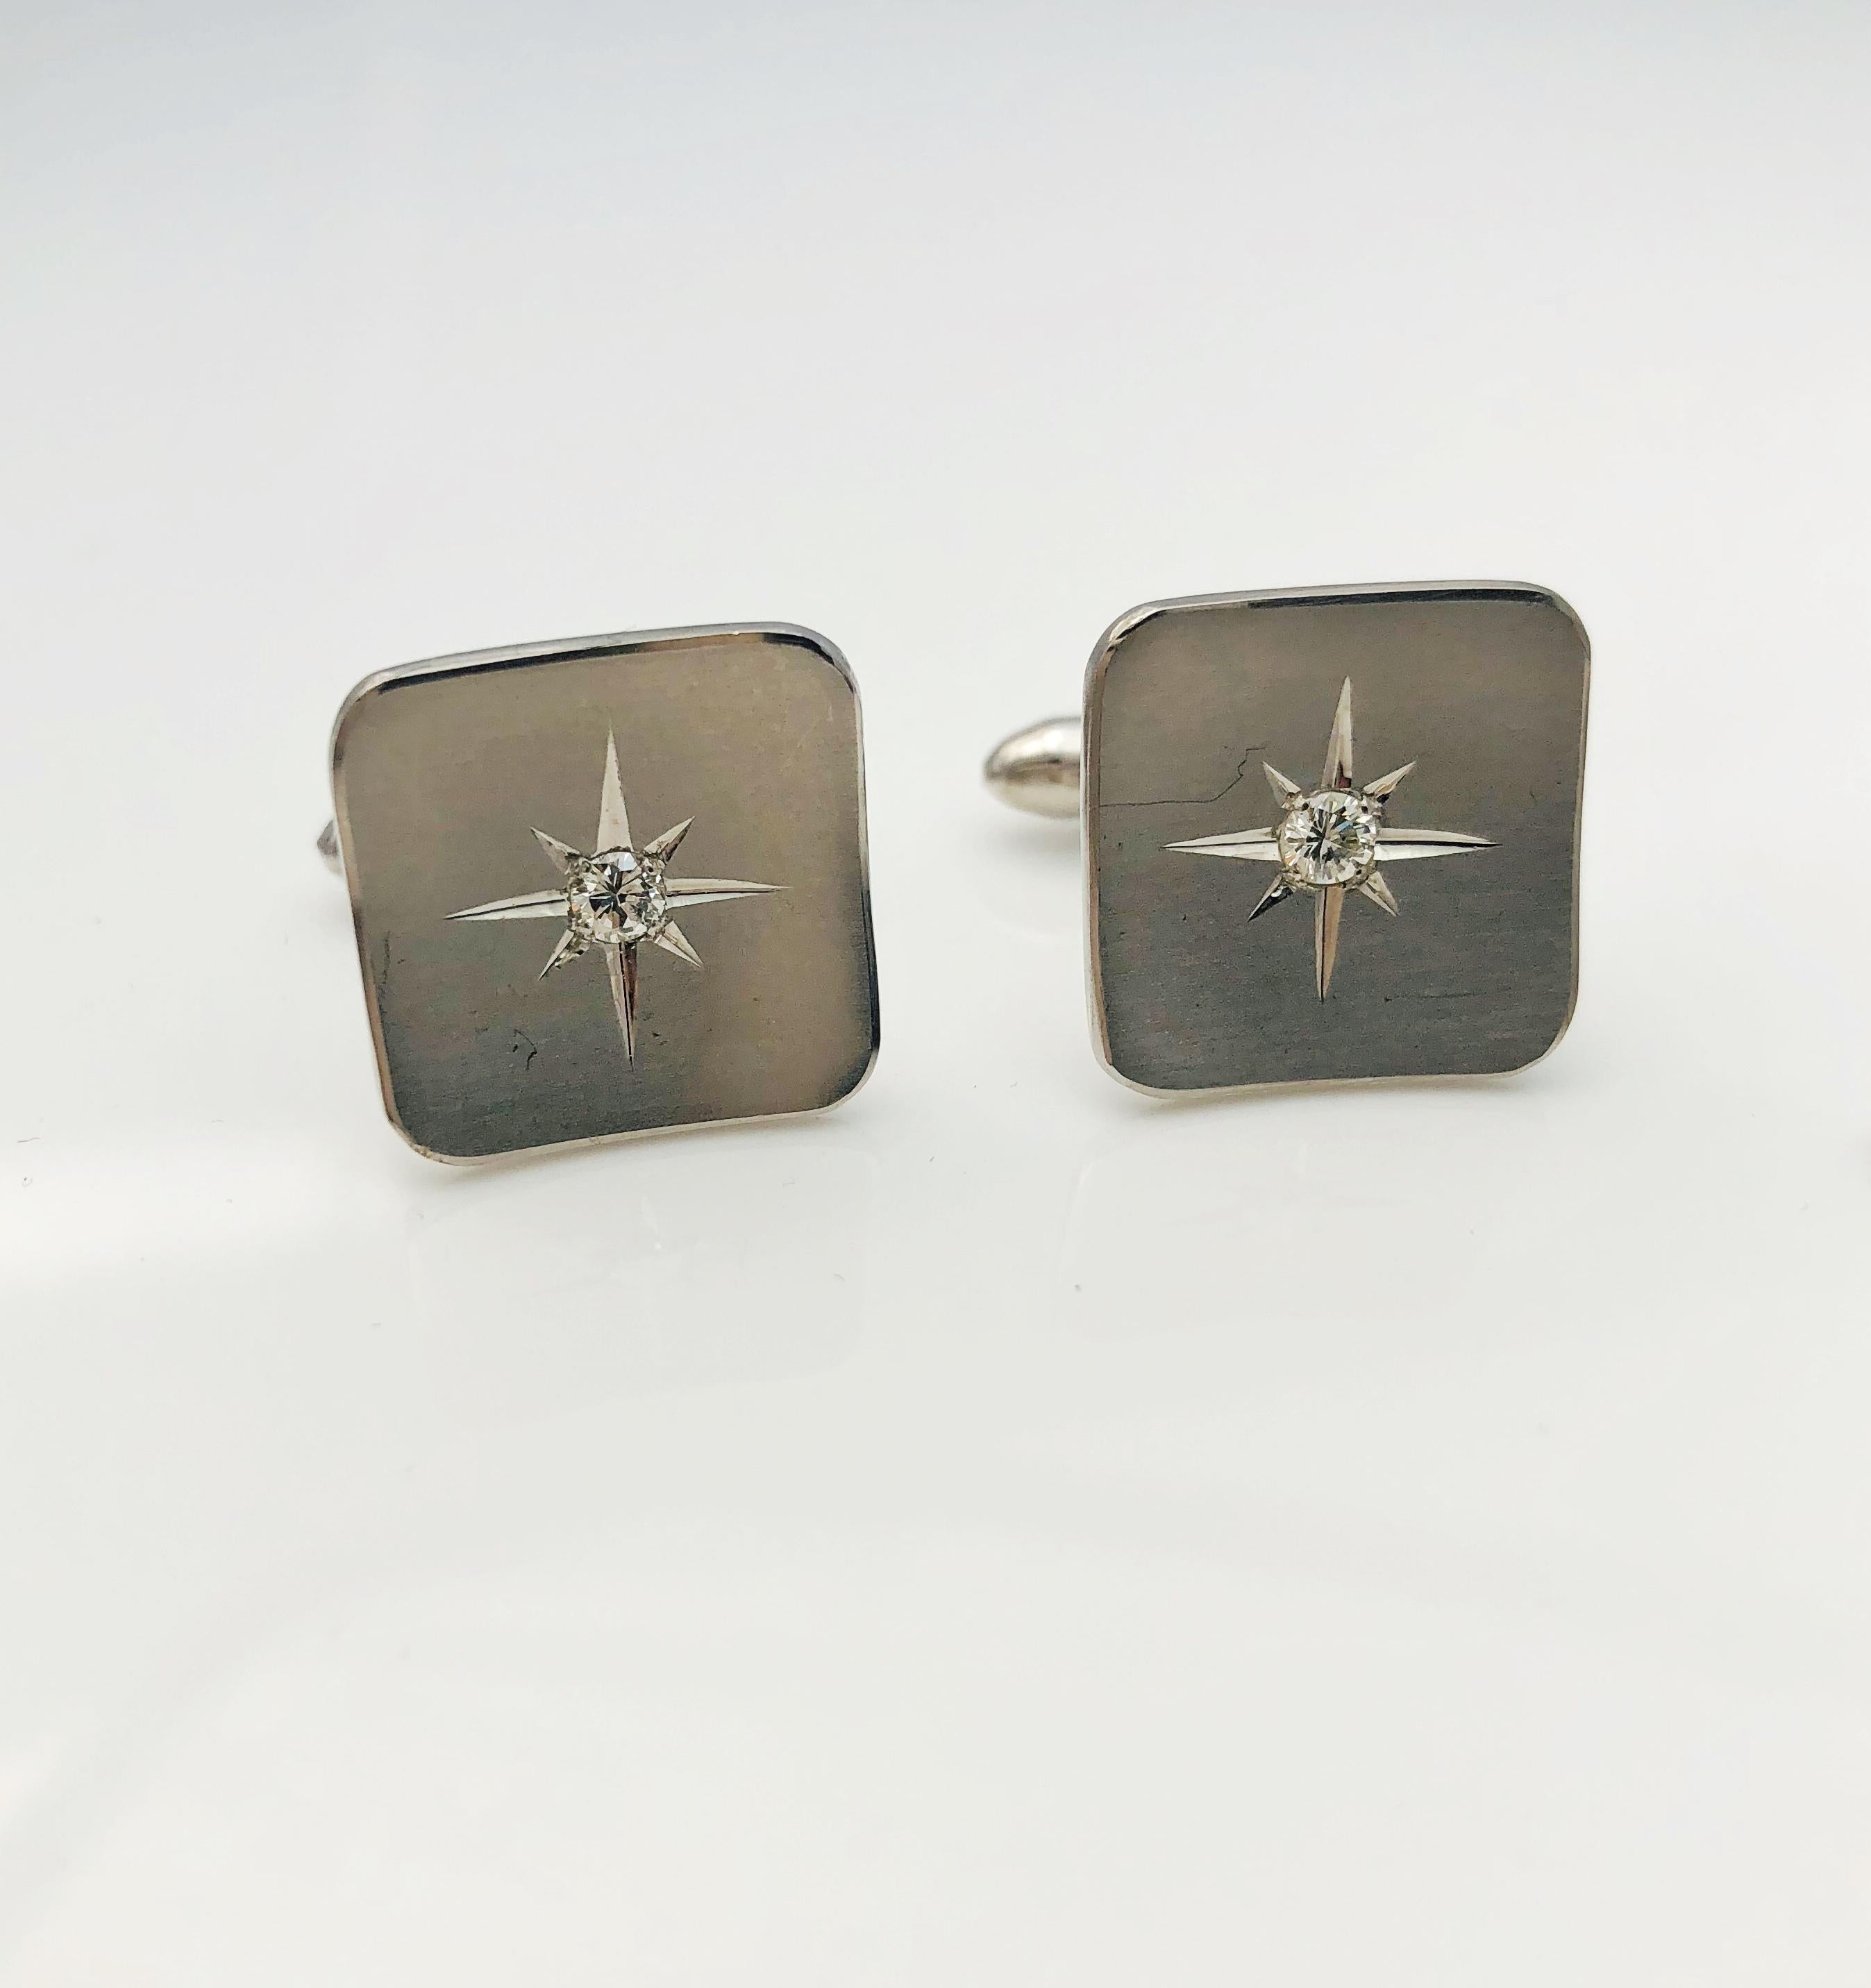 Absolutely Gorgeous Tuxedo Cufflinks and studs! This Vintage set is made in 14K White Gold. Each piece has a starburst symbol with a single diamond at the center. The cuffs each have a .10 carat round brilliant diamond and the studs each have a .06